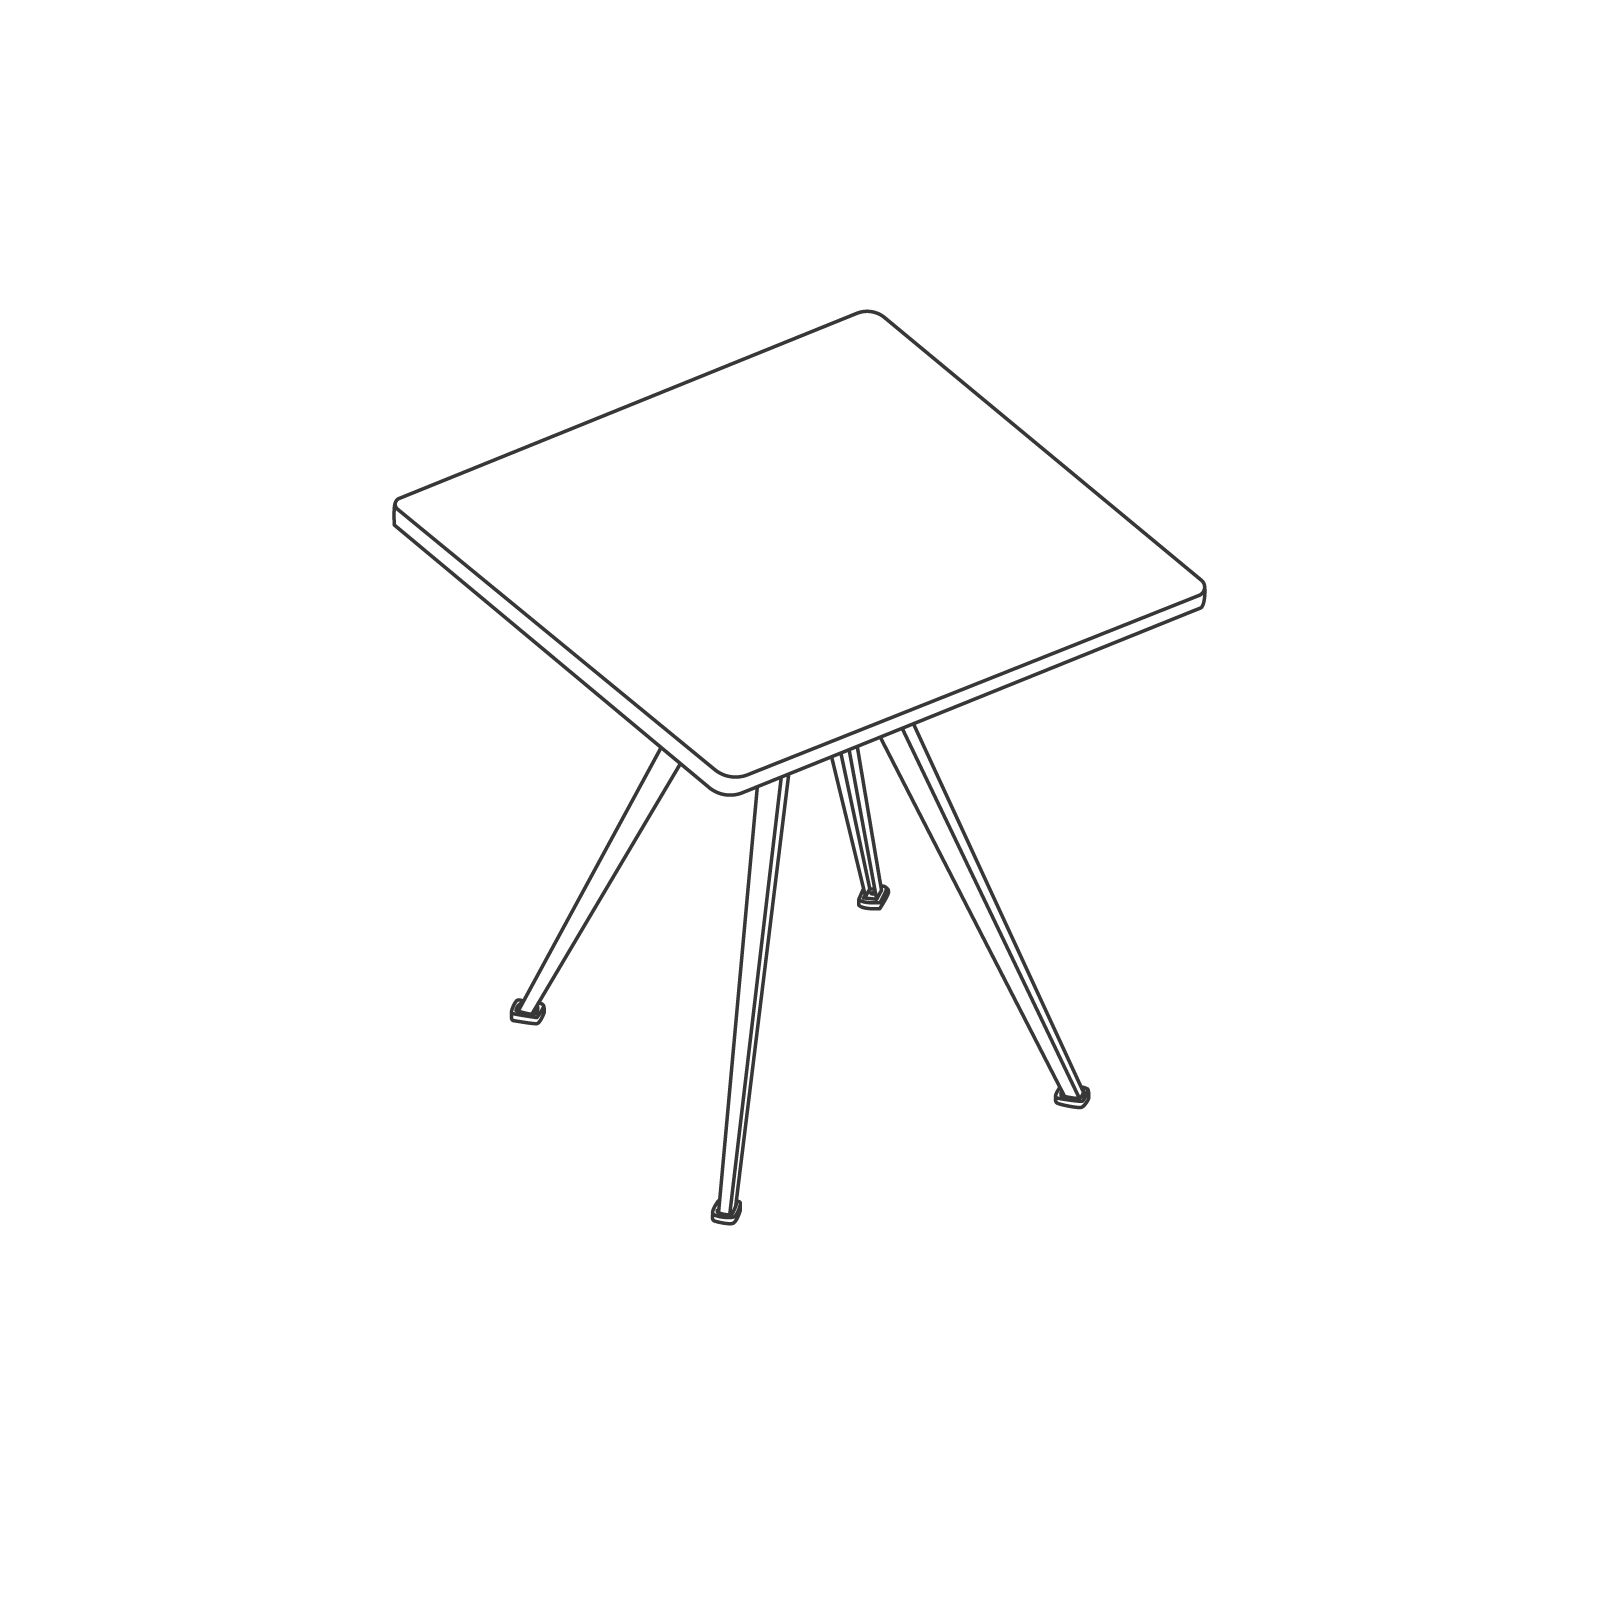 A line drawing - Pyramid Café Table–Square